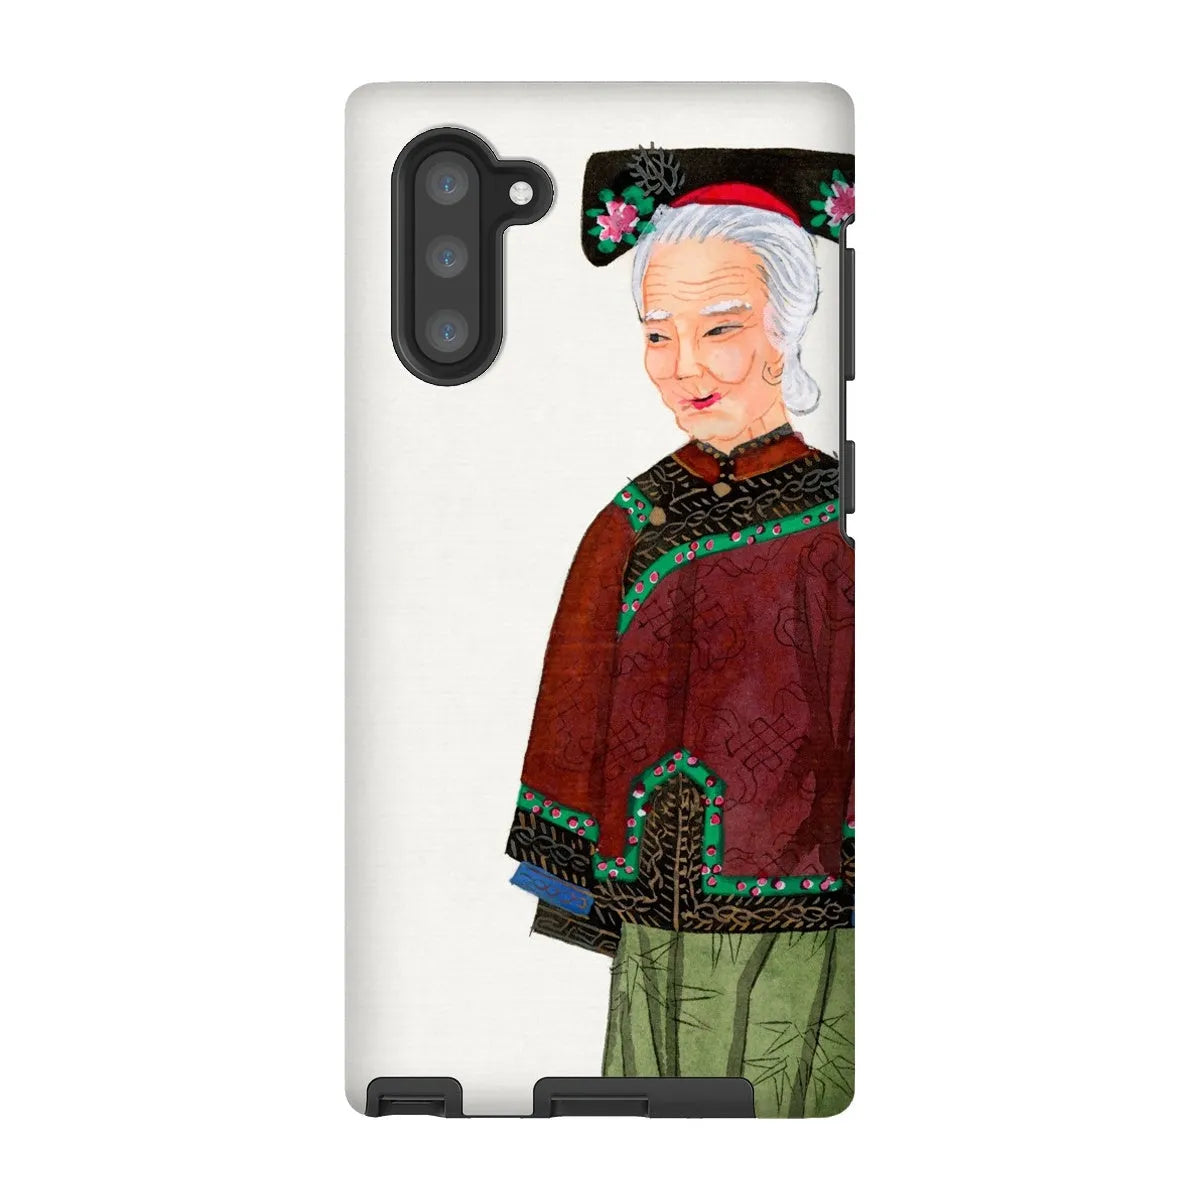 Grand Dame Too - Aesthetic Chinese Art Phone Case - Samsung Galaxy Note 10 / Matte - Mobile Phone Cases - Aesthetic Art